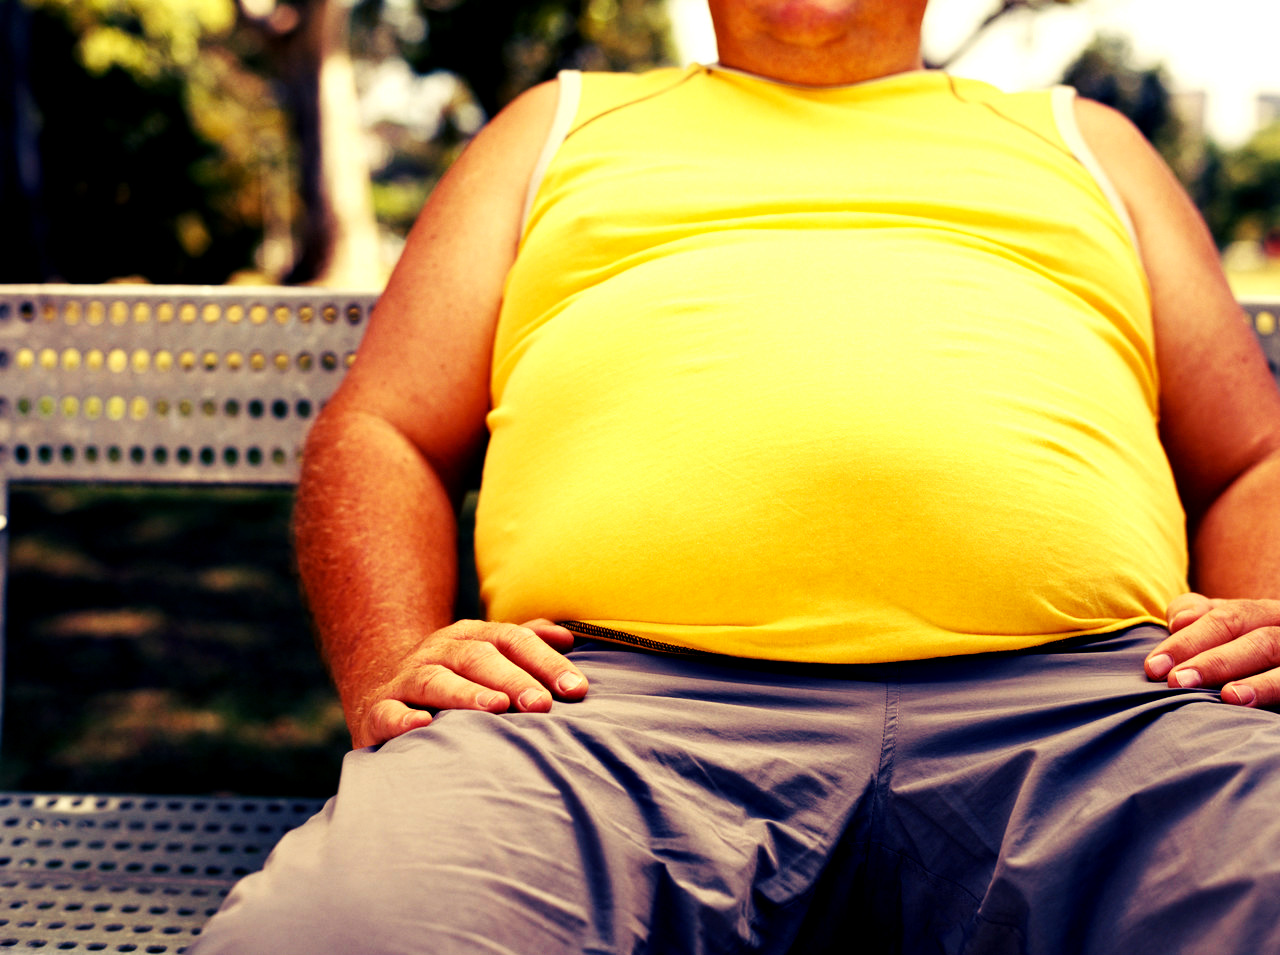 The most popular theory about what causes obesity may be very wrong